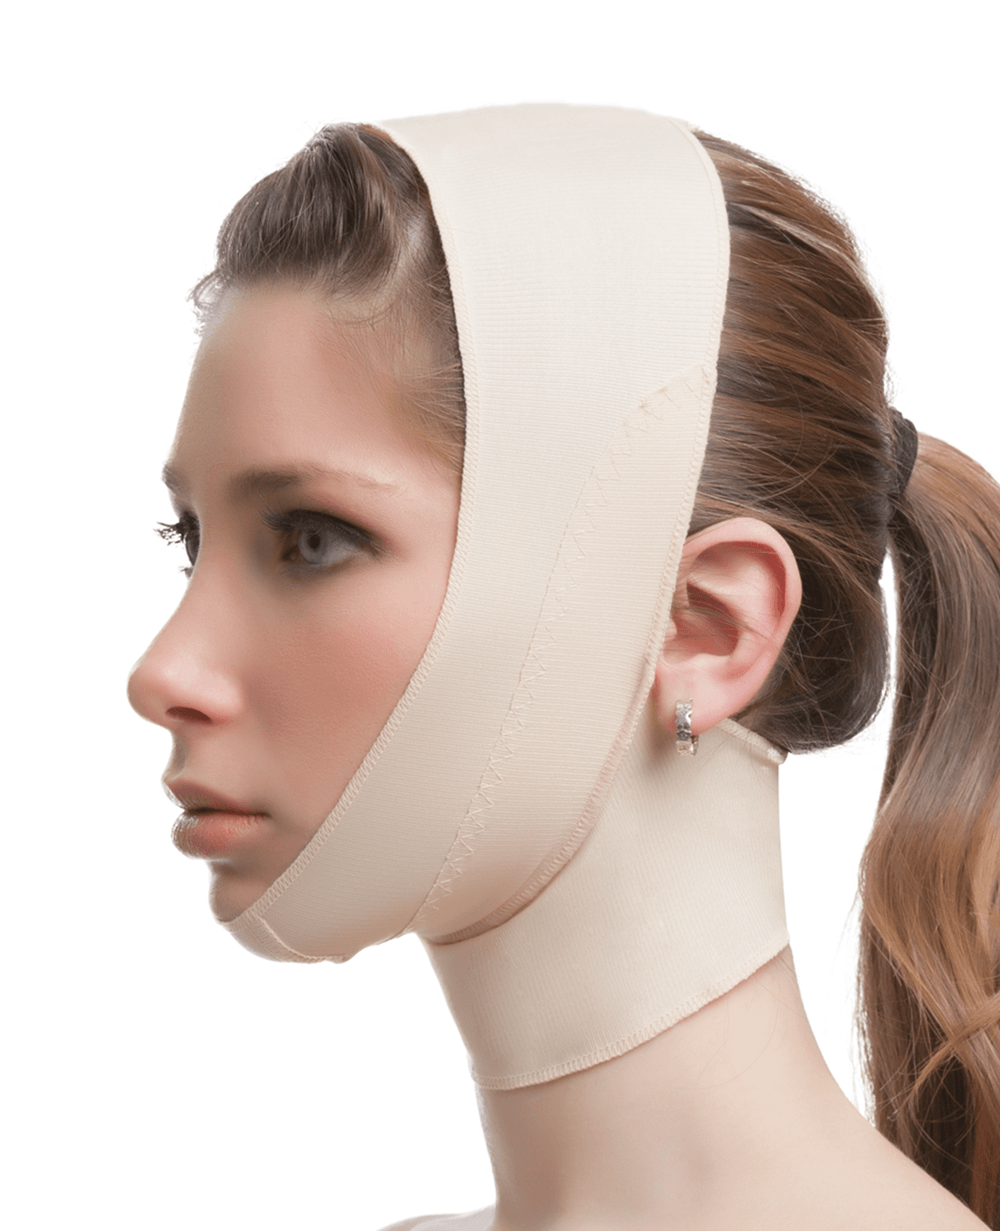 Chin Strap Support Compression Garment with Medium Neck Support (FA02, FA03) - Isavela Compression Garments